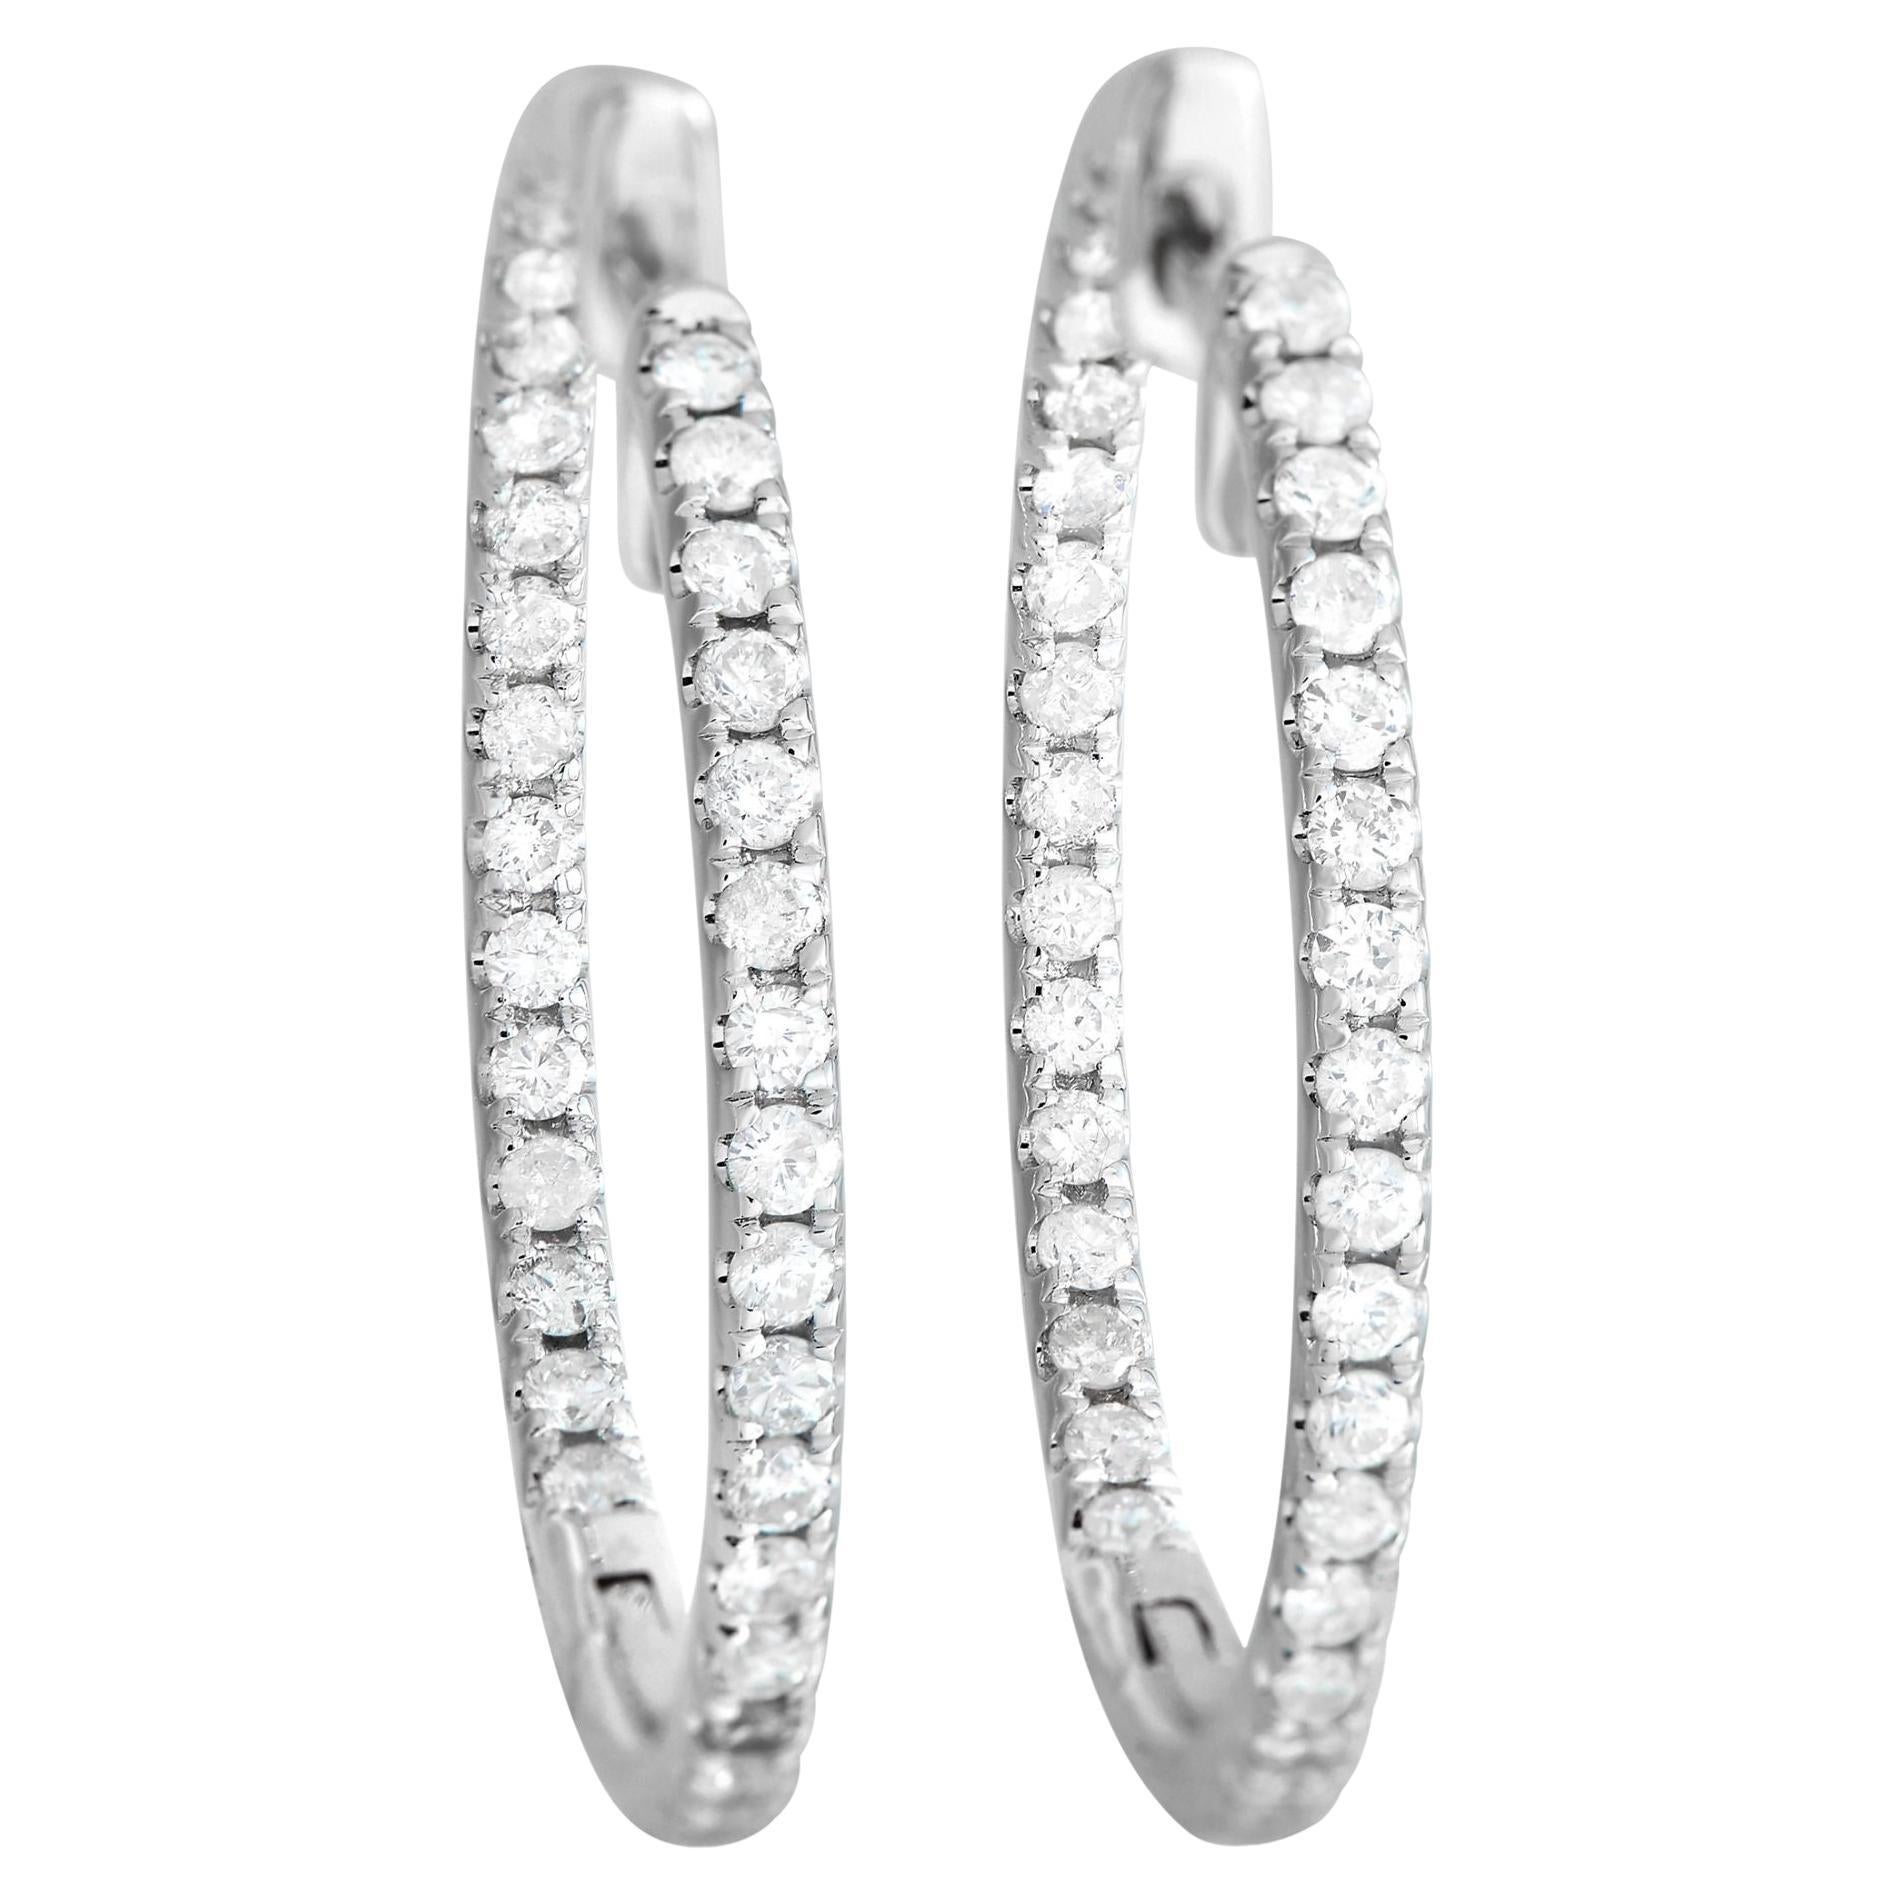 LB Exclusive 14k White Gold 1.0 Carat Diamond Inside-Out Hoop Earrings For Sale